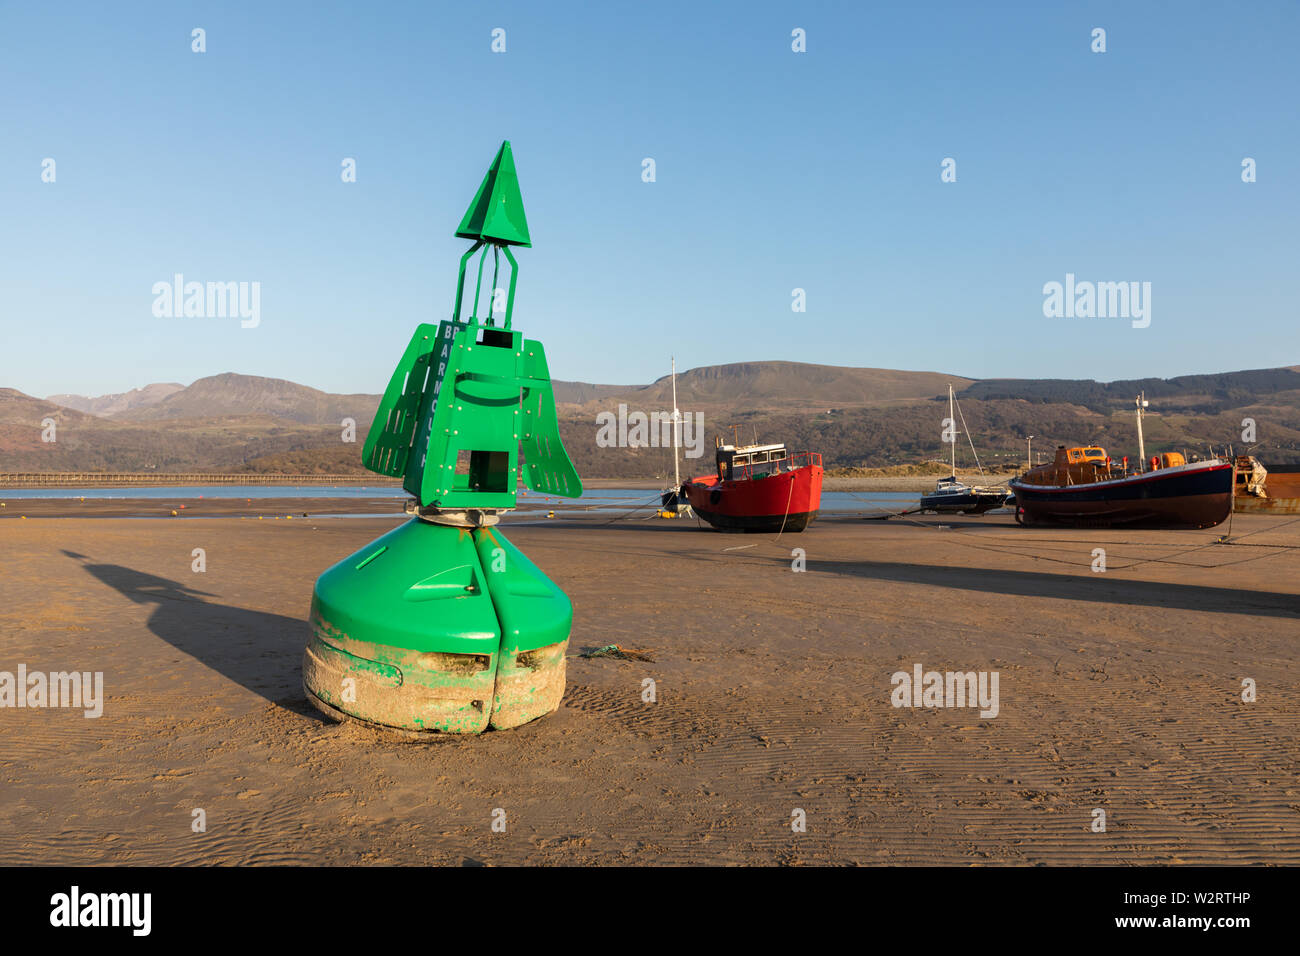 Barmouth, Gwynedd, Wales, UK: A green buoy and beached boats stand on rippled sand in Barmouth harbour after the tide has gone out. Stock Photo